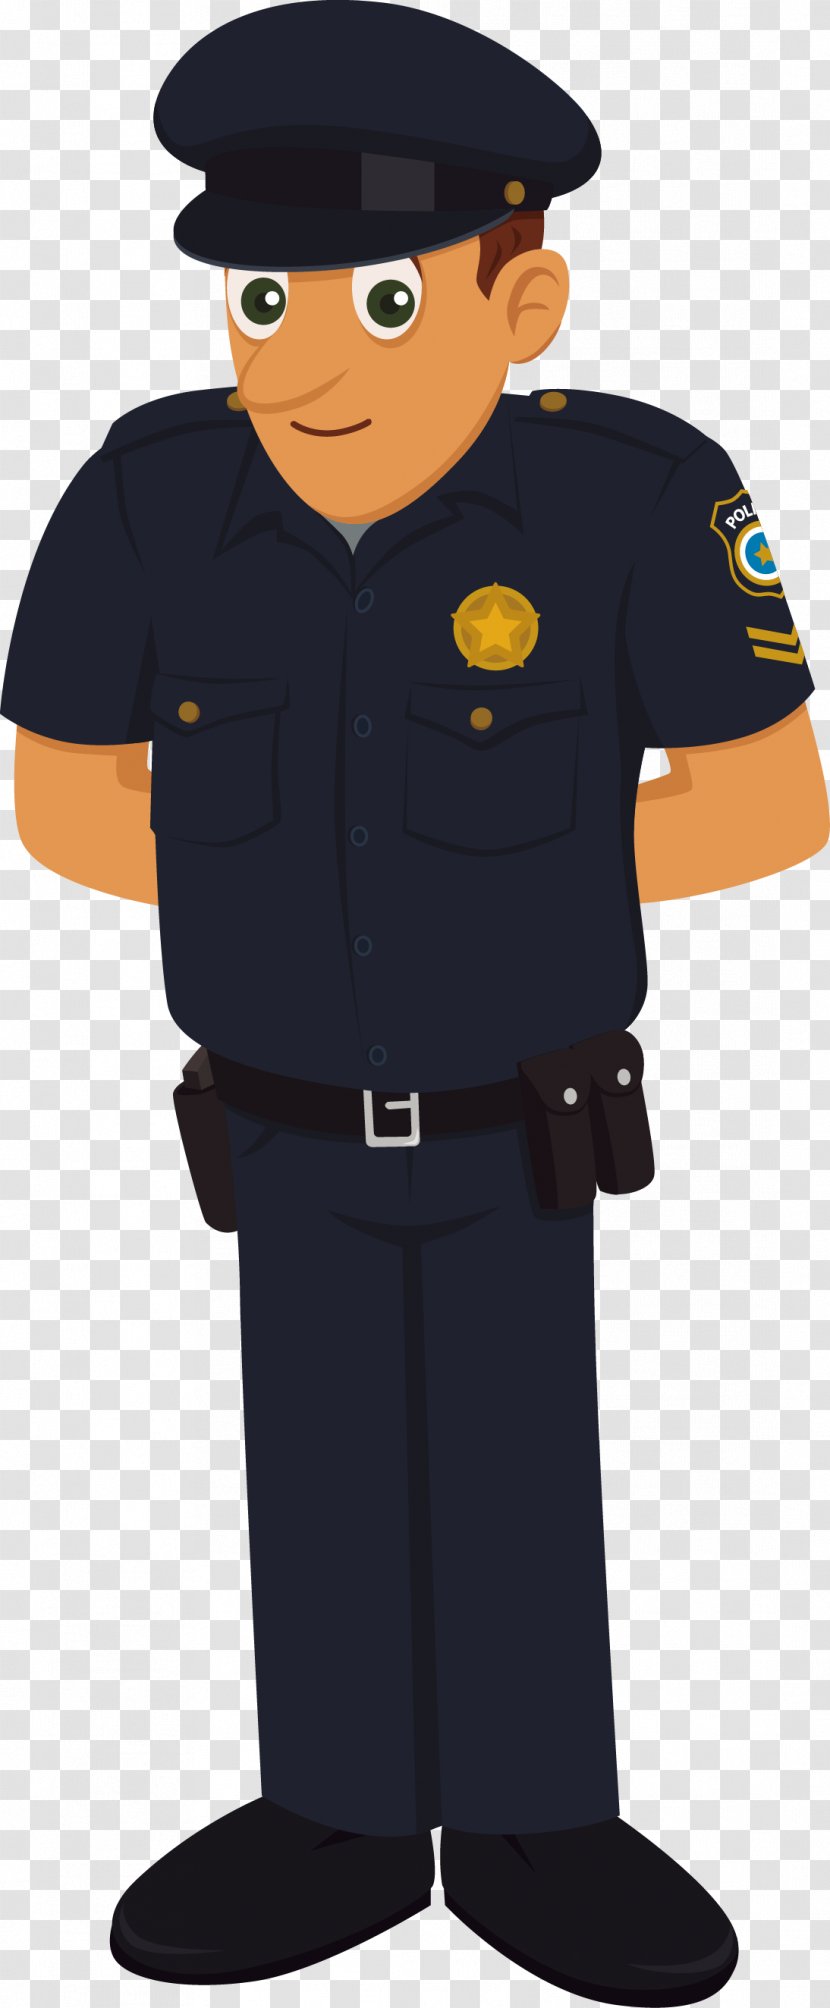 Police Officer Uniforms Of The United States Clip Art - Cartoon - Vector Transparent PNG